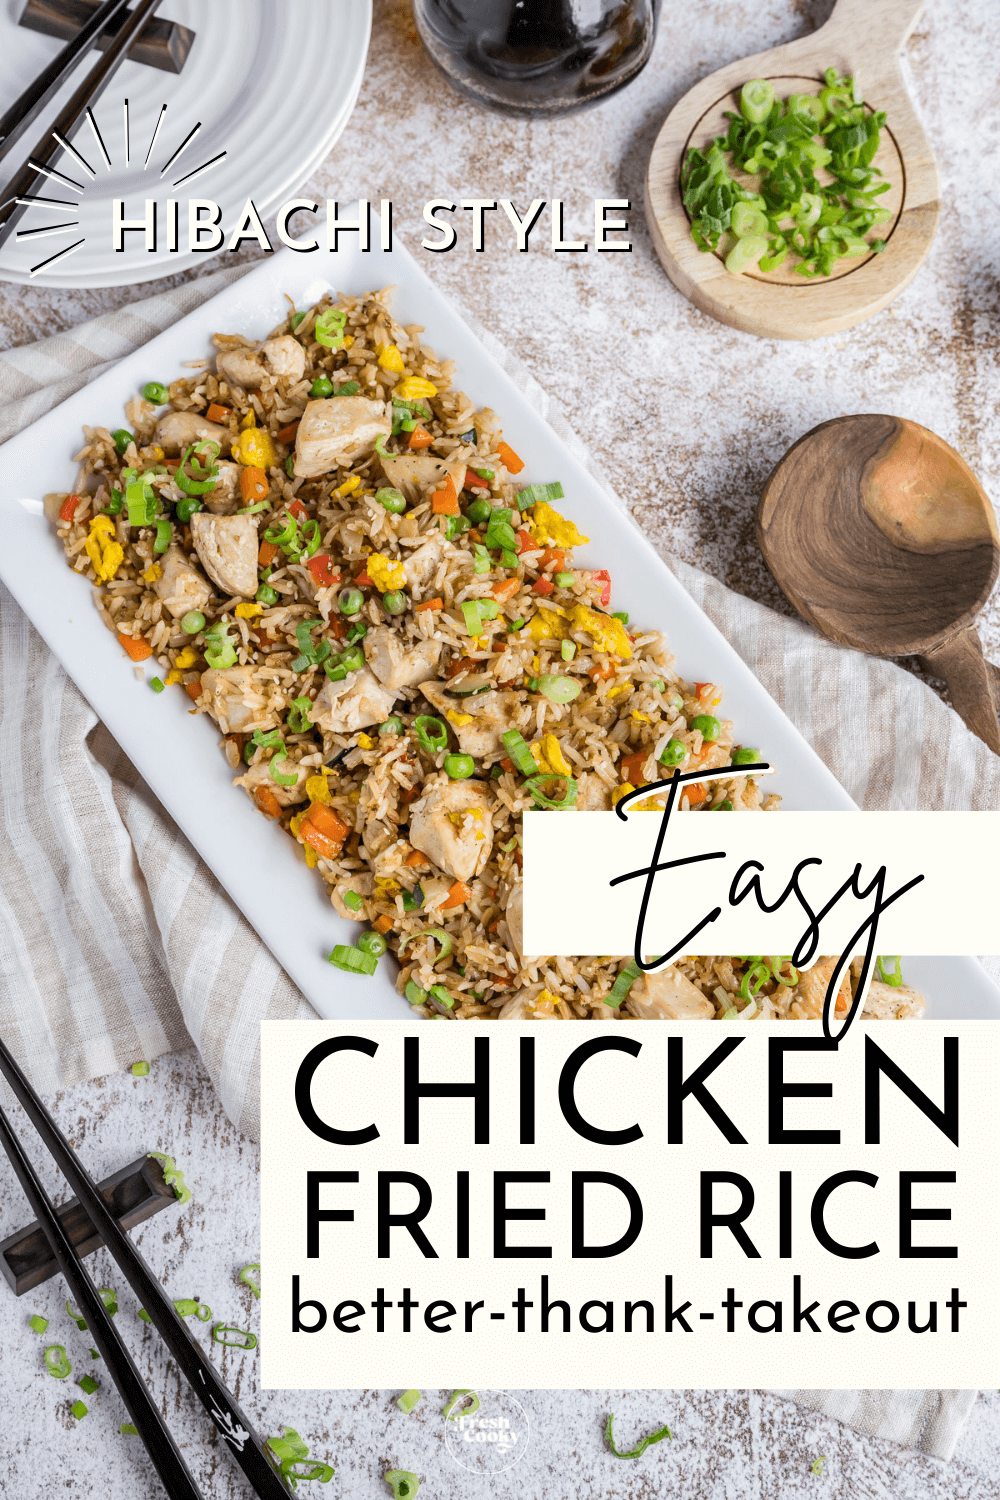 Blackstone Chicken Fried Rice pin, better than takeout and easy too with platter of rice, green onions, chopsticks and a wooden spoon nearby.